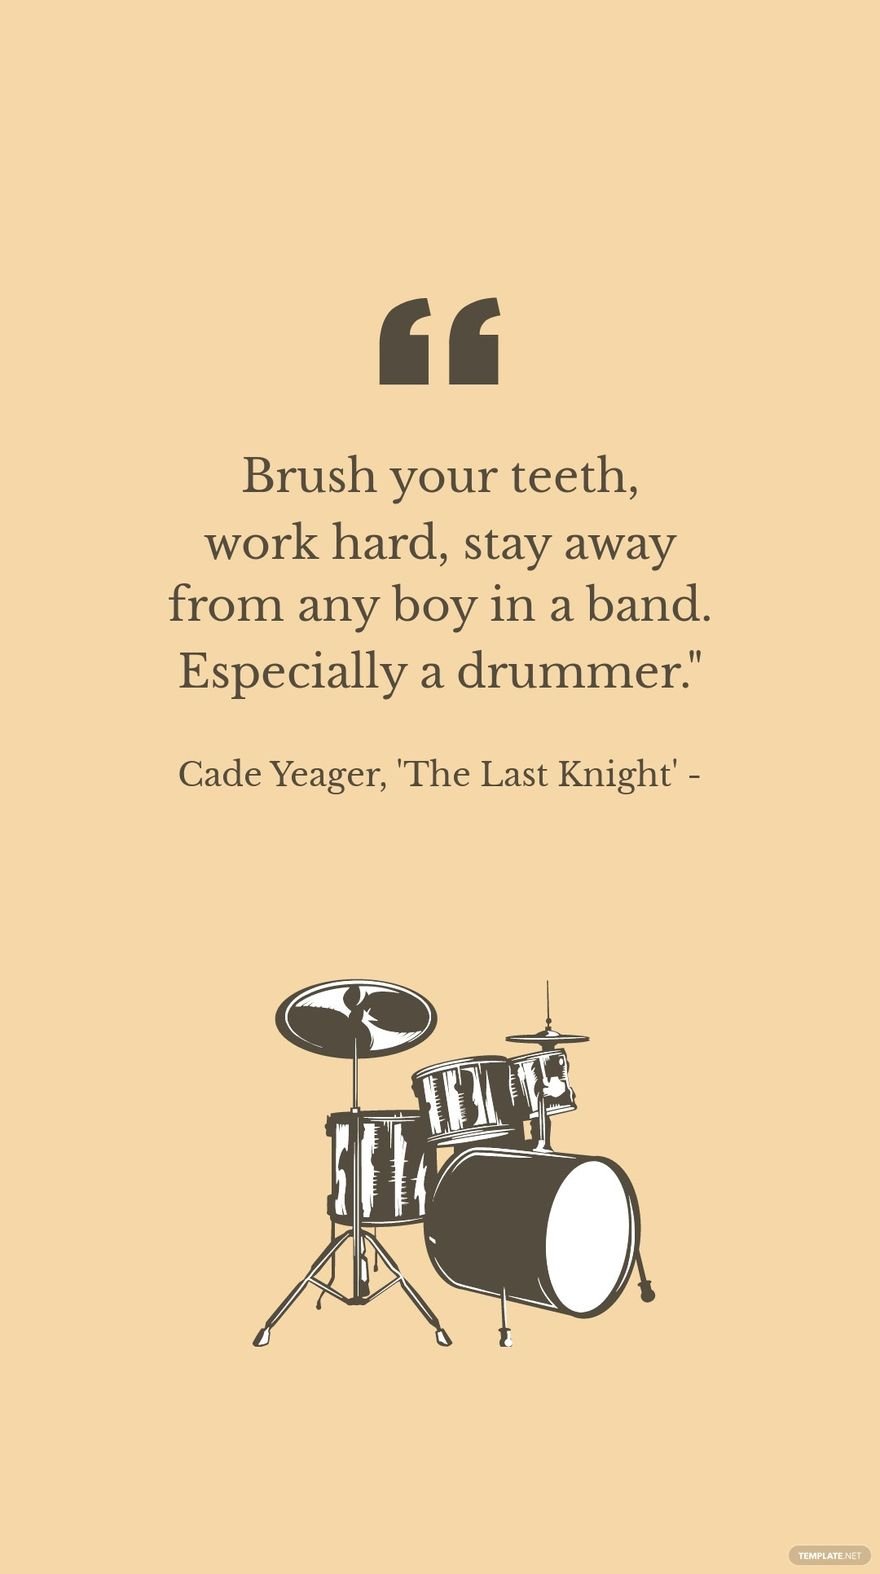  Cade Yeager, 'The Last Knight' - Brush your teeth, work hard, stay away from any boy in a band. Especially a drummer.